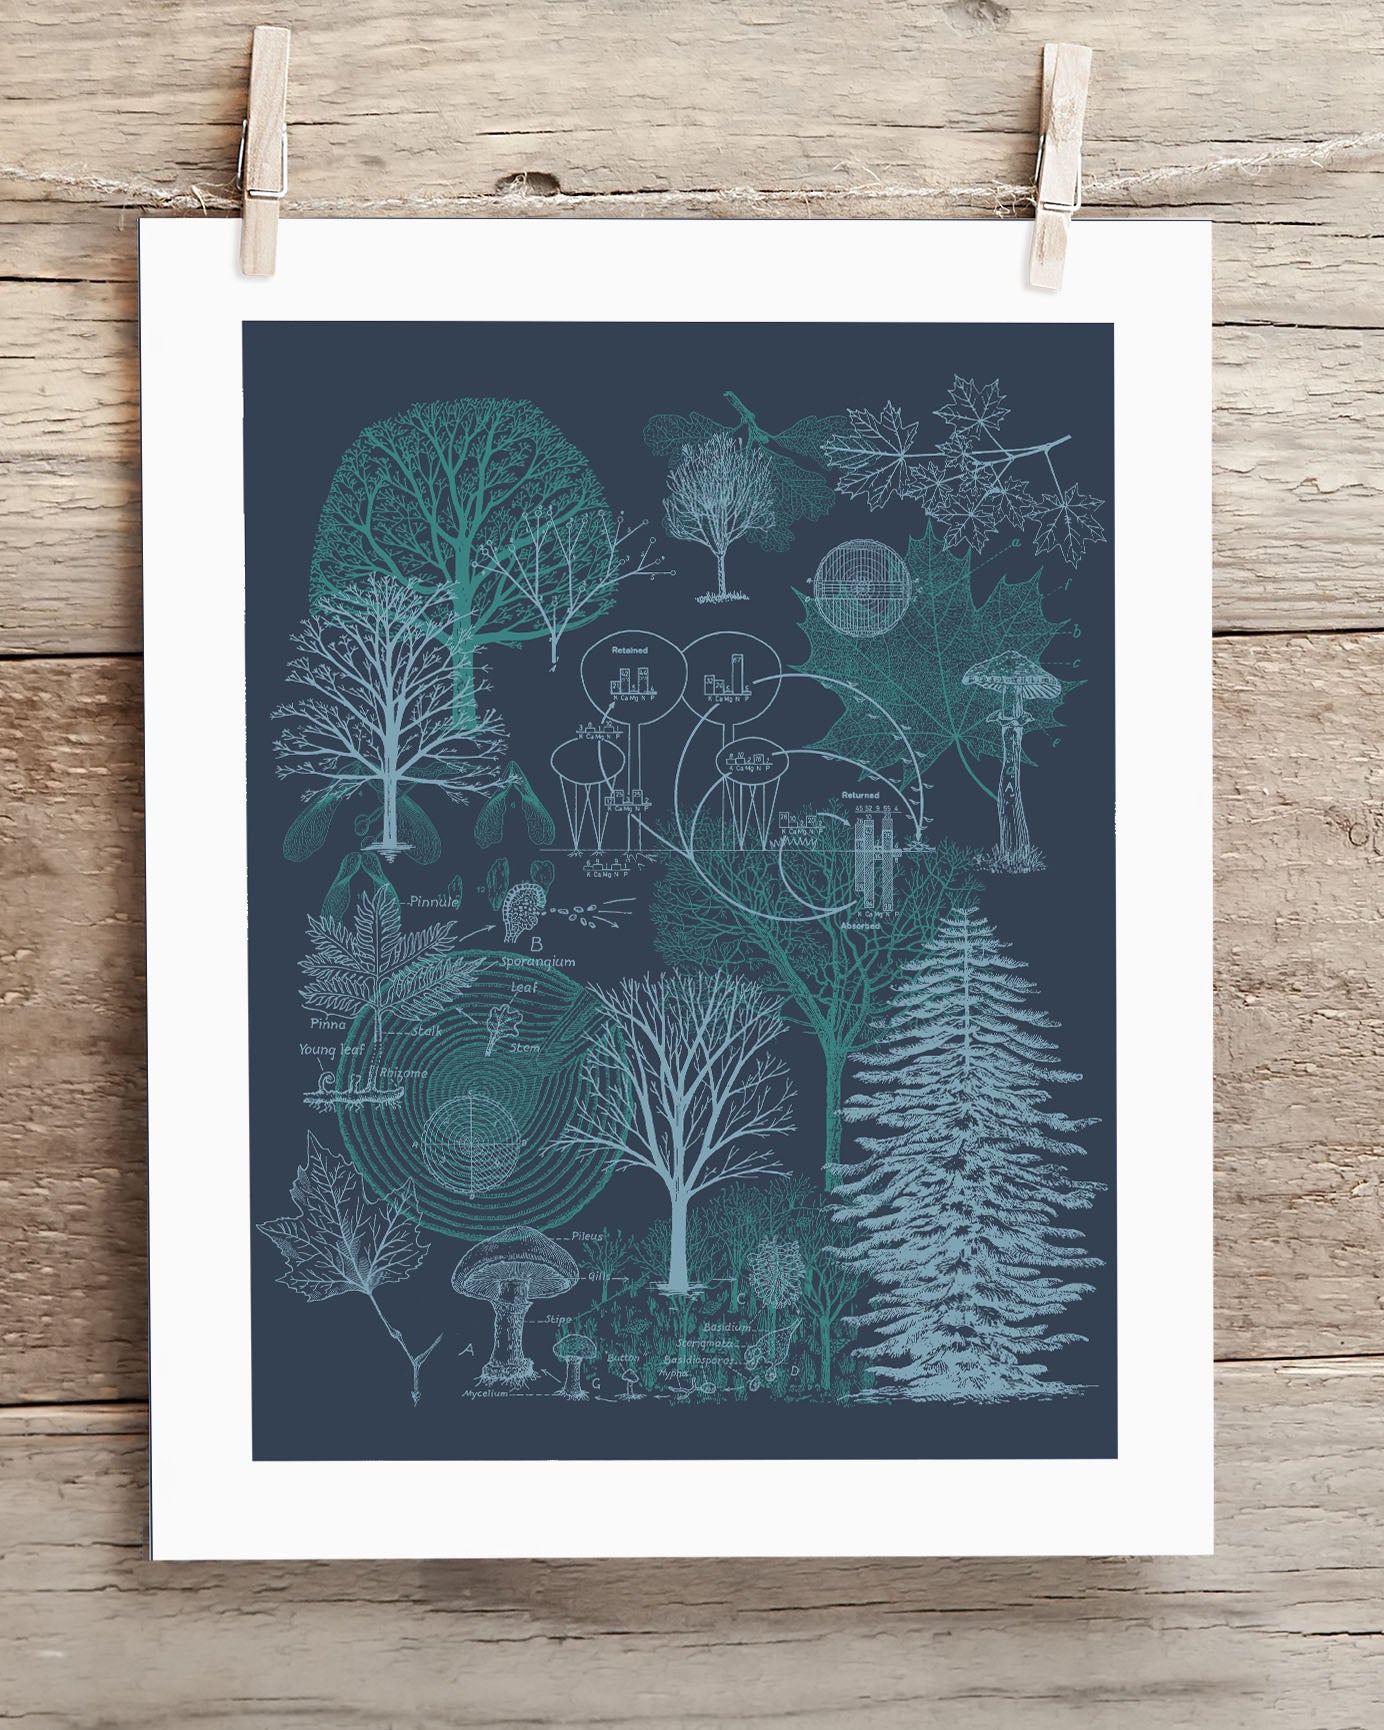 A Forest Scientific Illustration Museum Print of trees on a Cognitive Surplus wooden hanger.